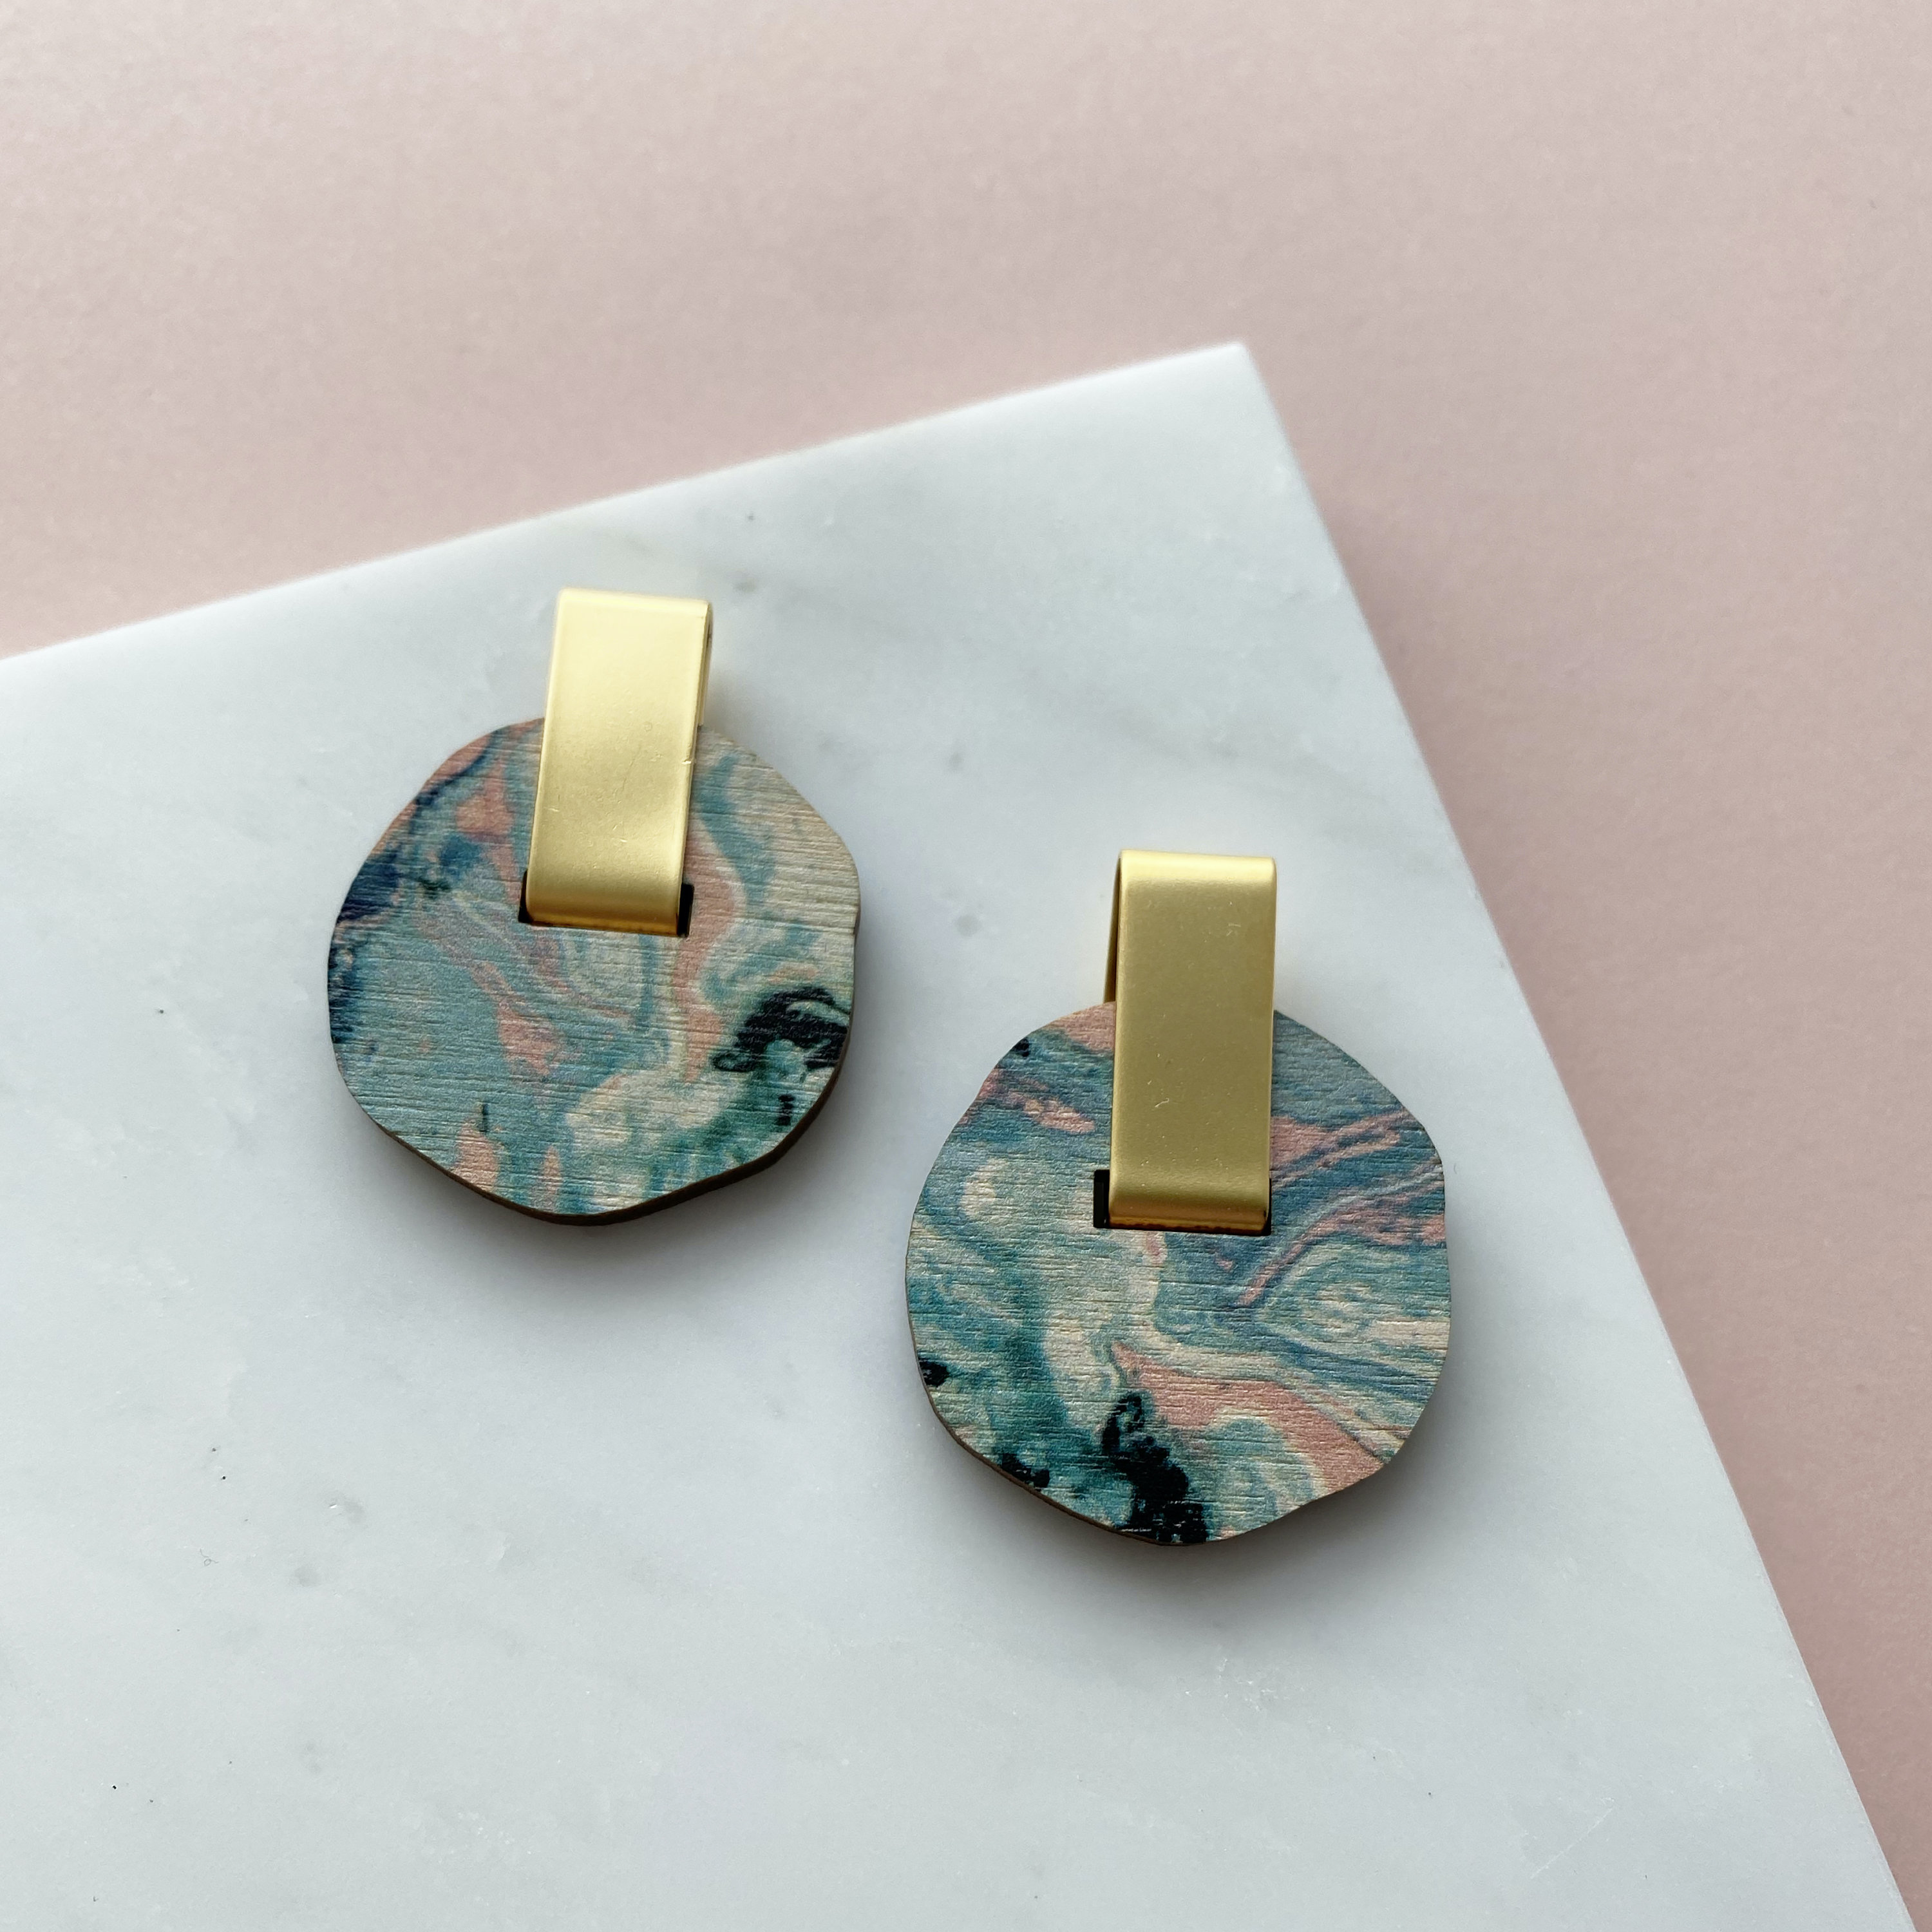 Disc Stud Earrings - Irregular Circle Studs Organic Geometric Gifts For Her Pastel Marble